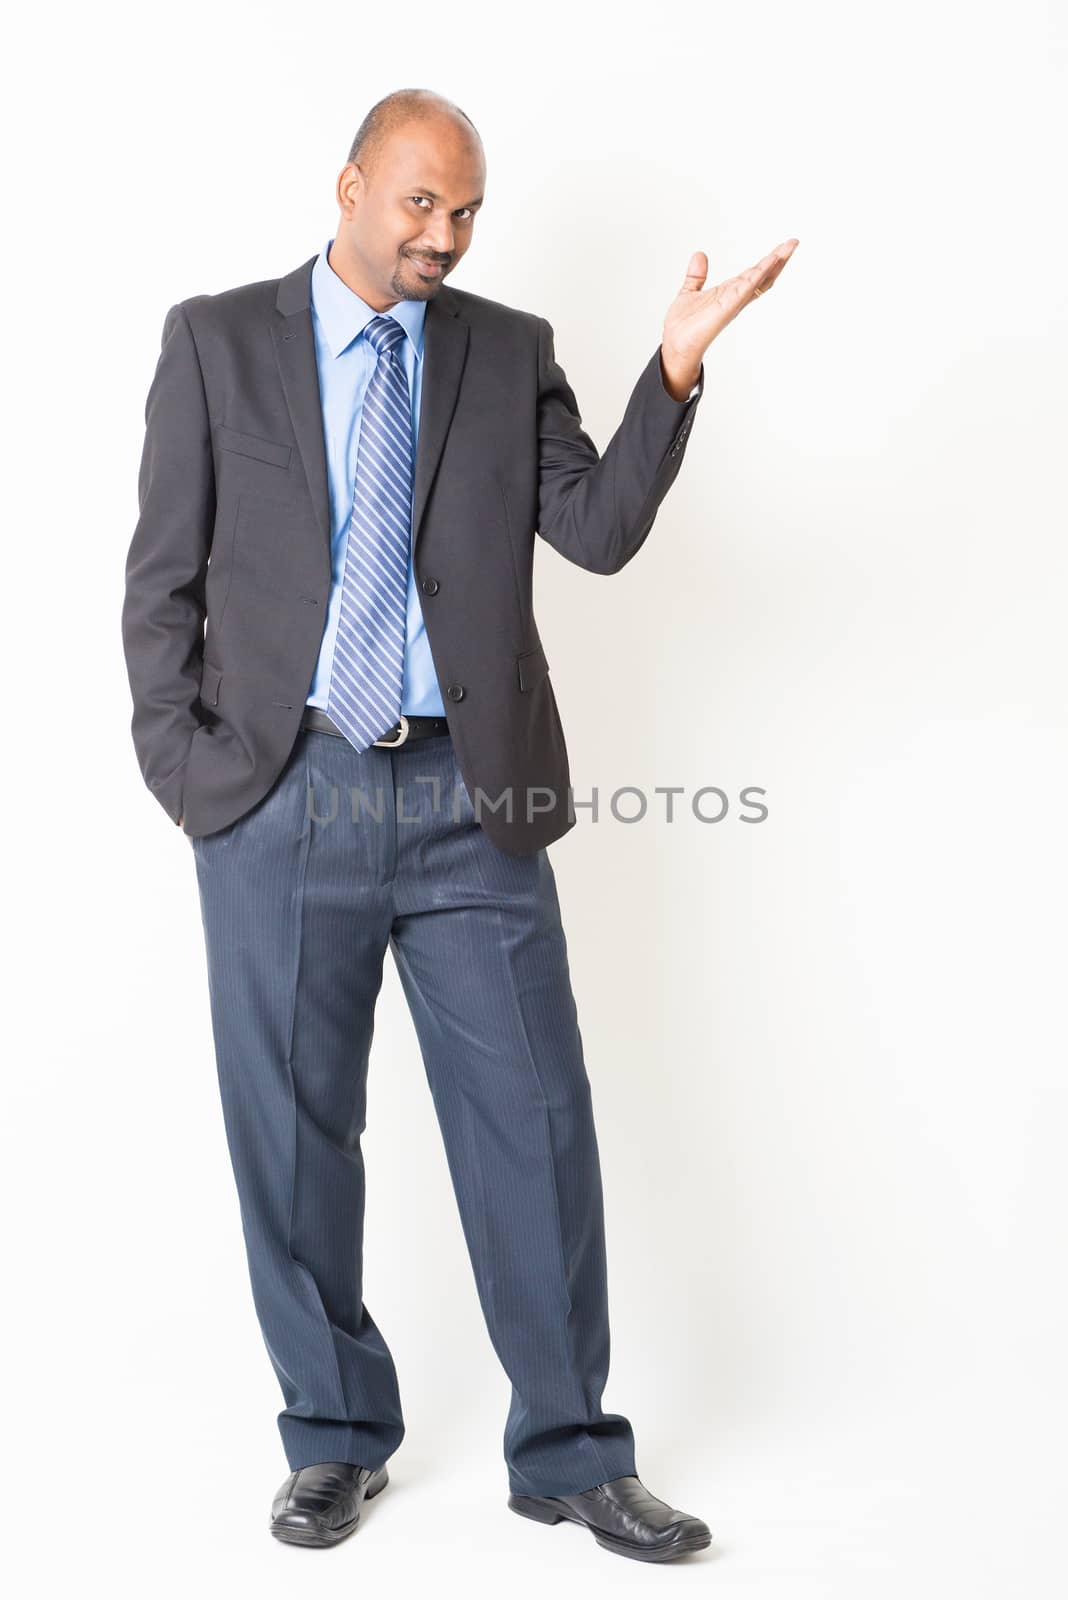 Portrait of full body mature Indian business man hand showing something, standing on plain background.